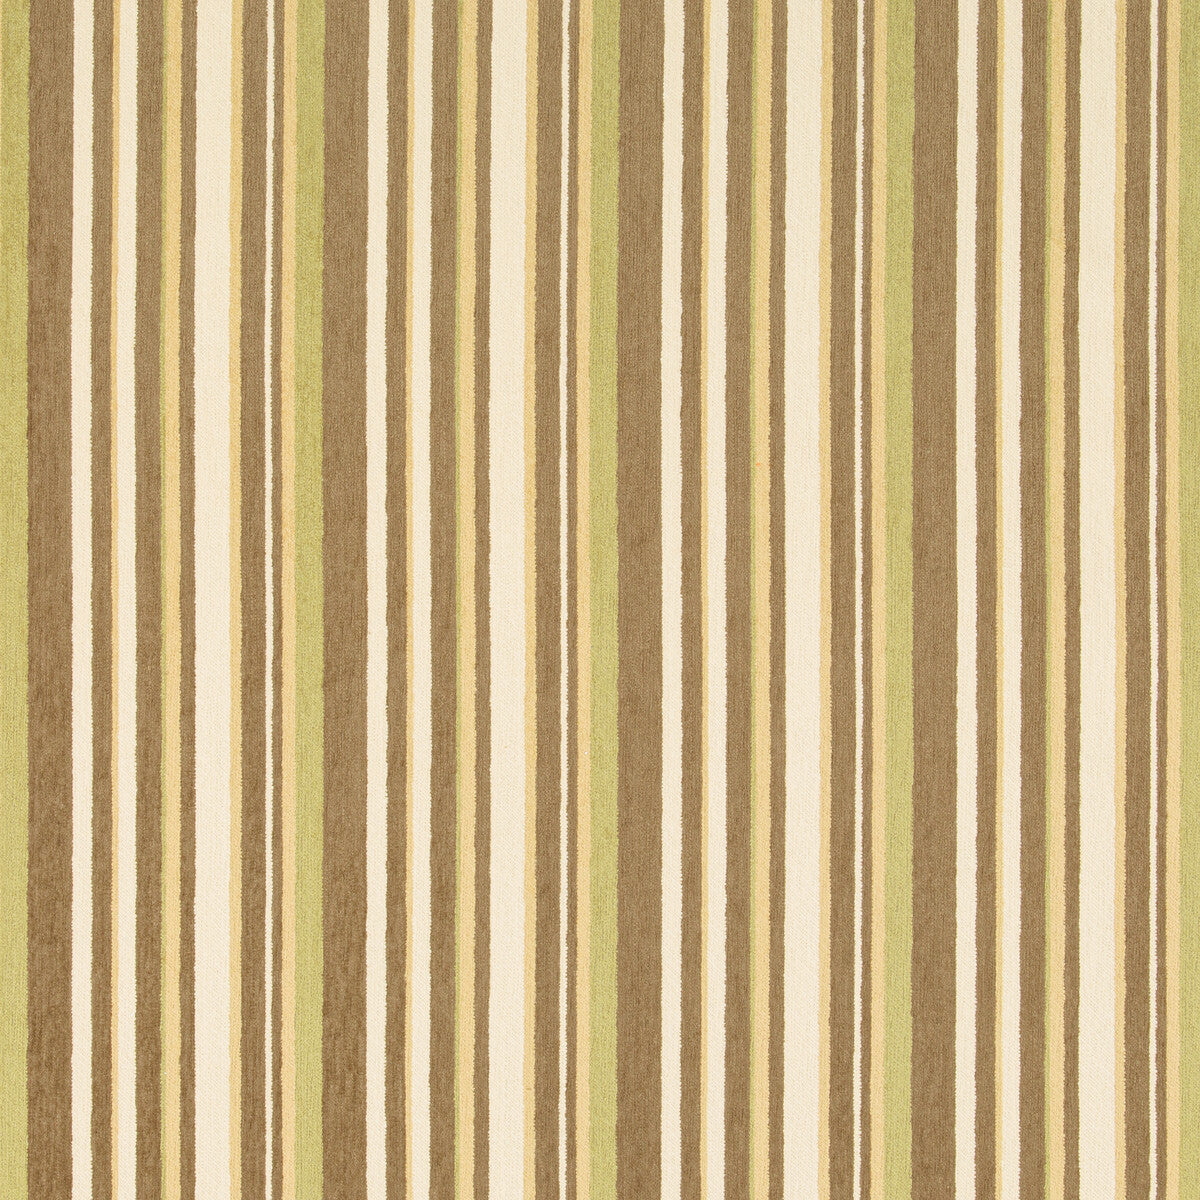 Causeway fabric in boxwood color - pattern 35868.16.0 - by Kravet Contract in the Gis Crypton collection